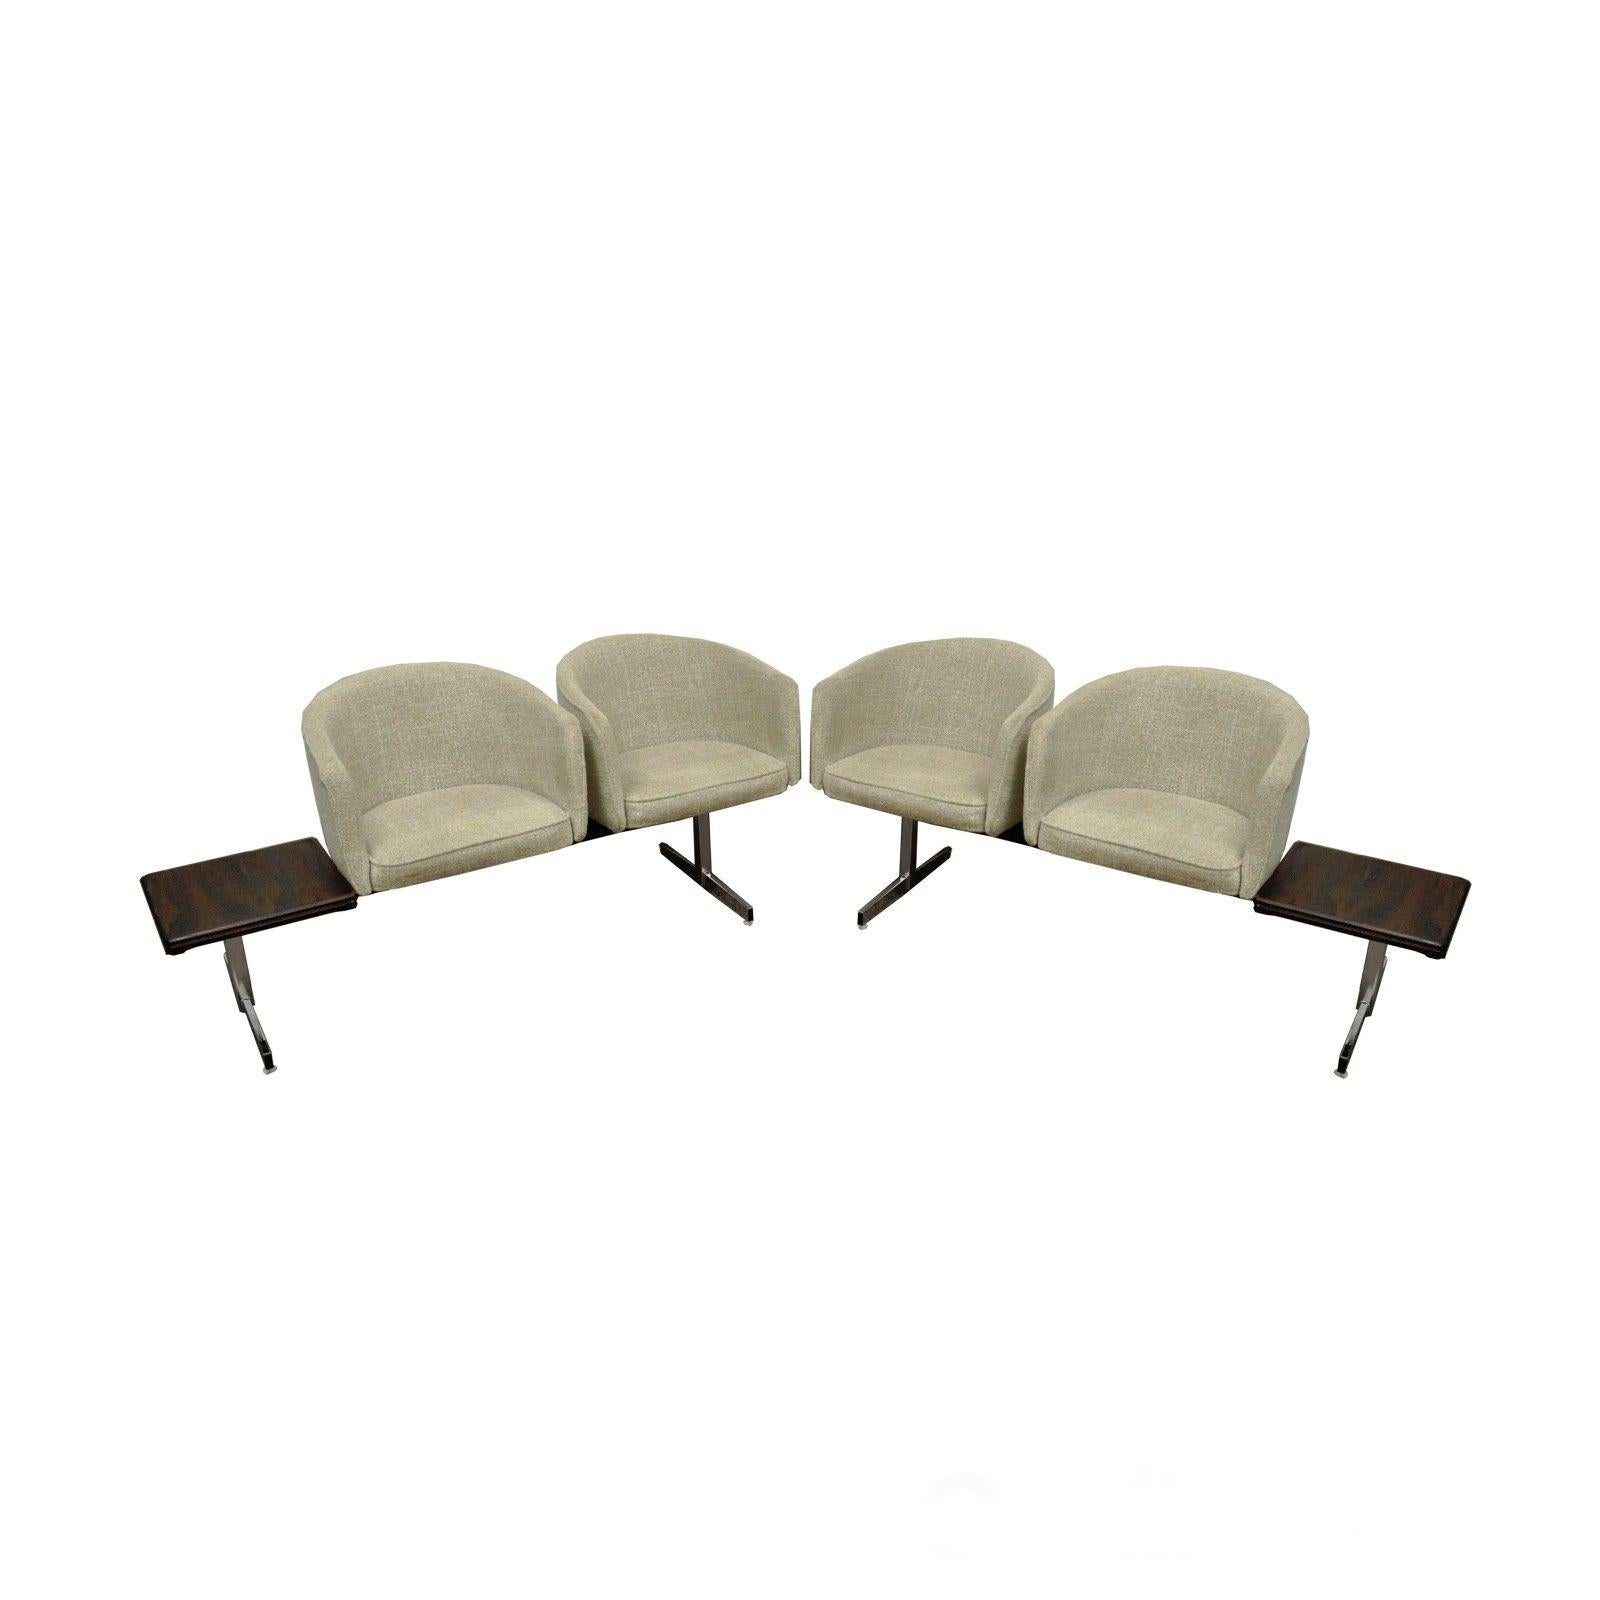 Vintage Midcentury Danish Modern Rosewood End Tables Club Chairs Sectional Sofa For Sale